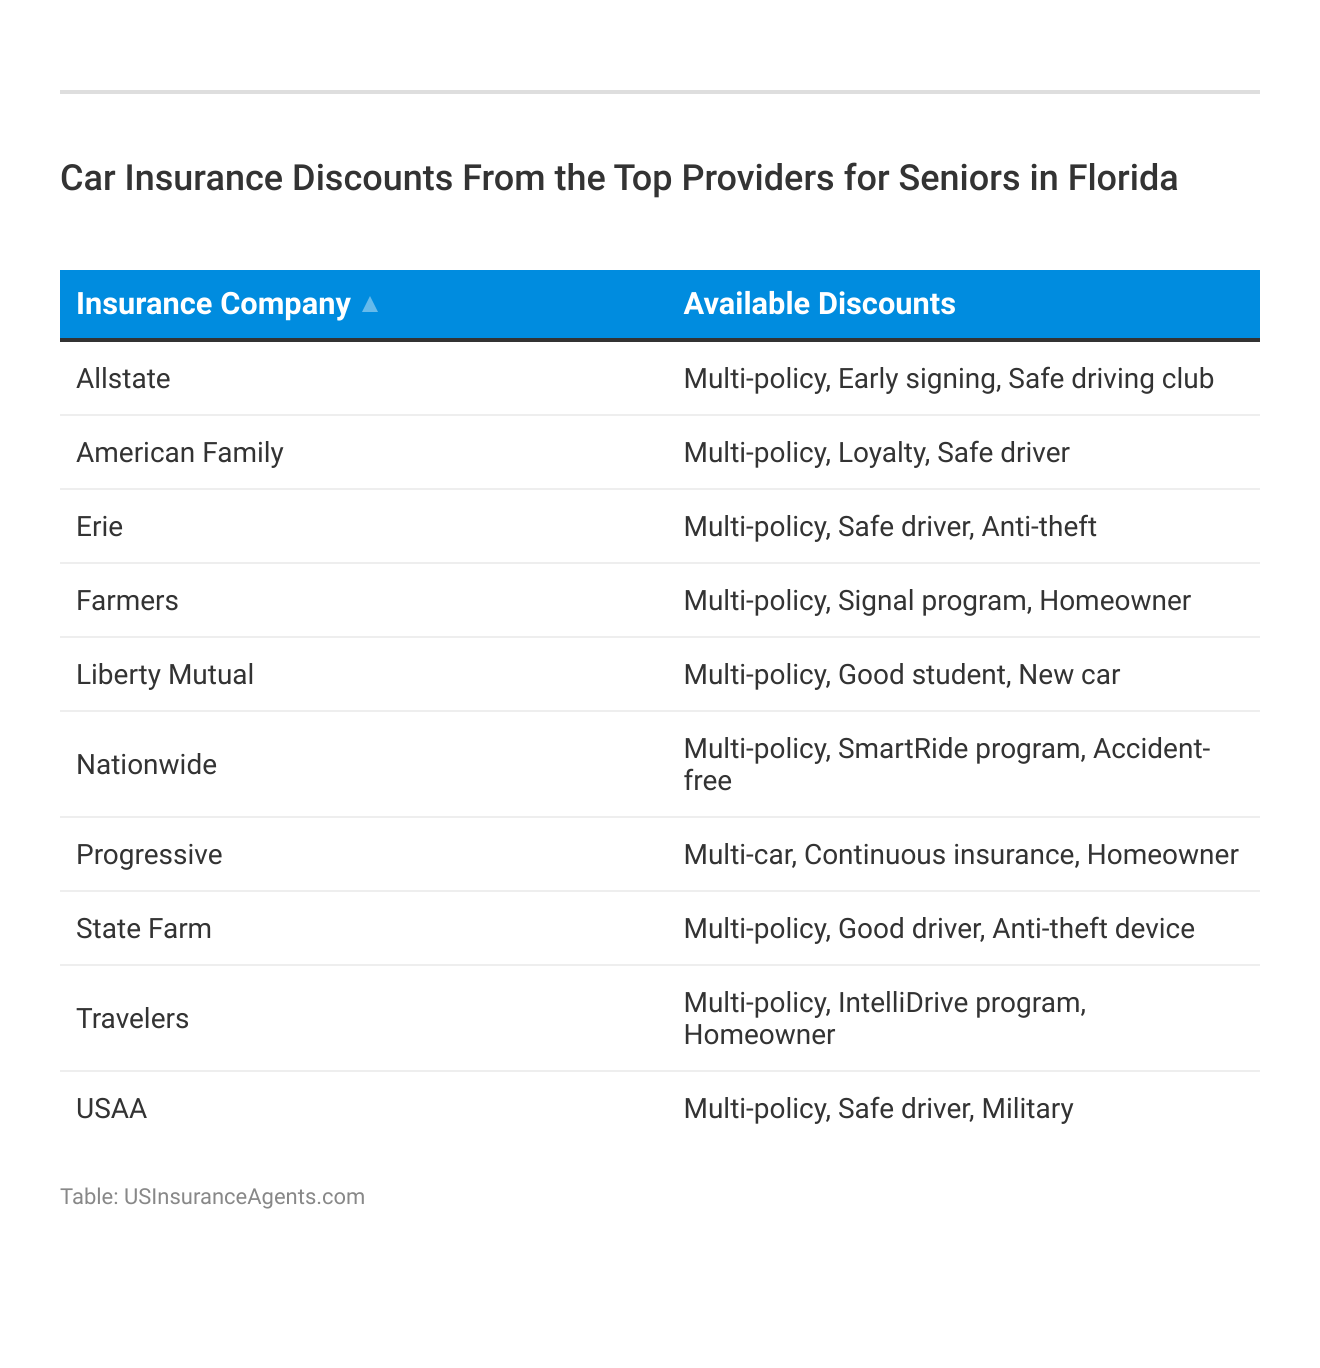 <h3>Car Insurance Discounts From the Top Providers for Seniors in Florida</h3>